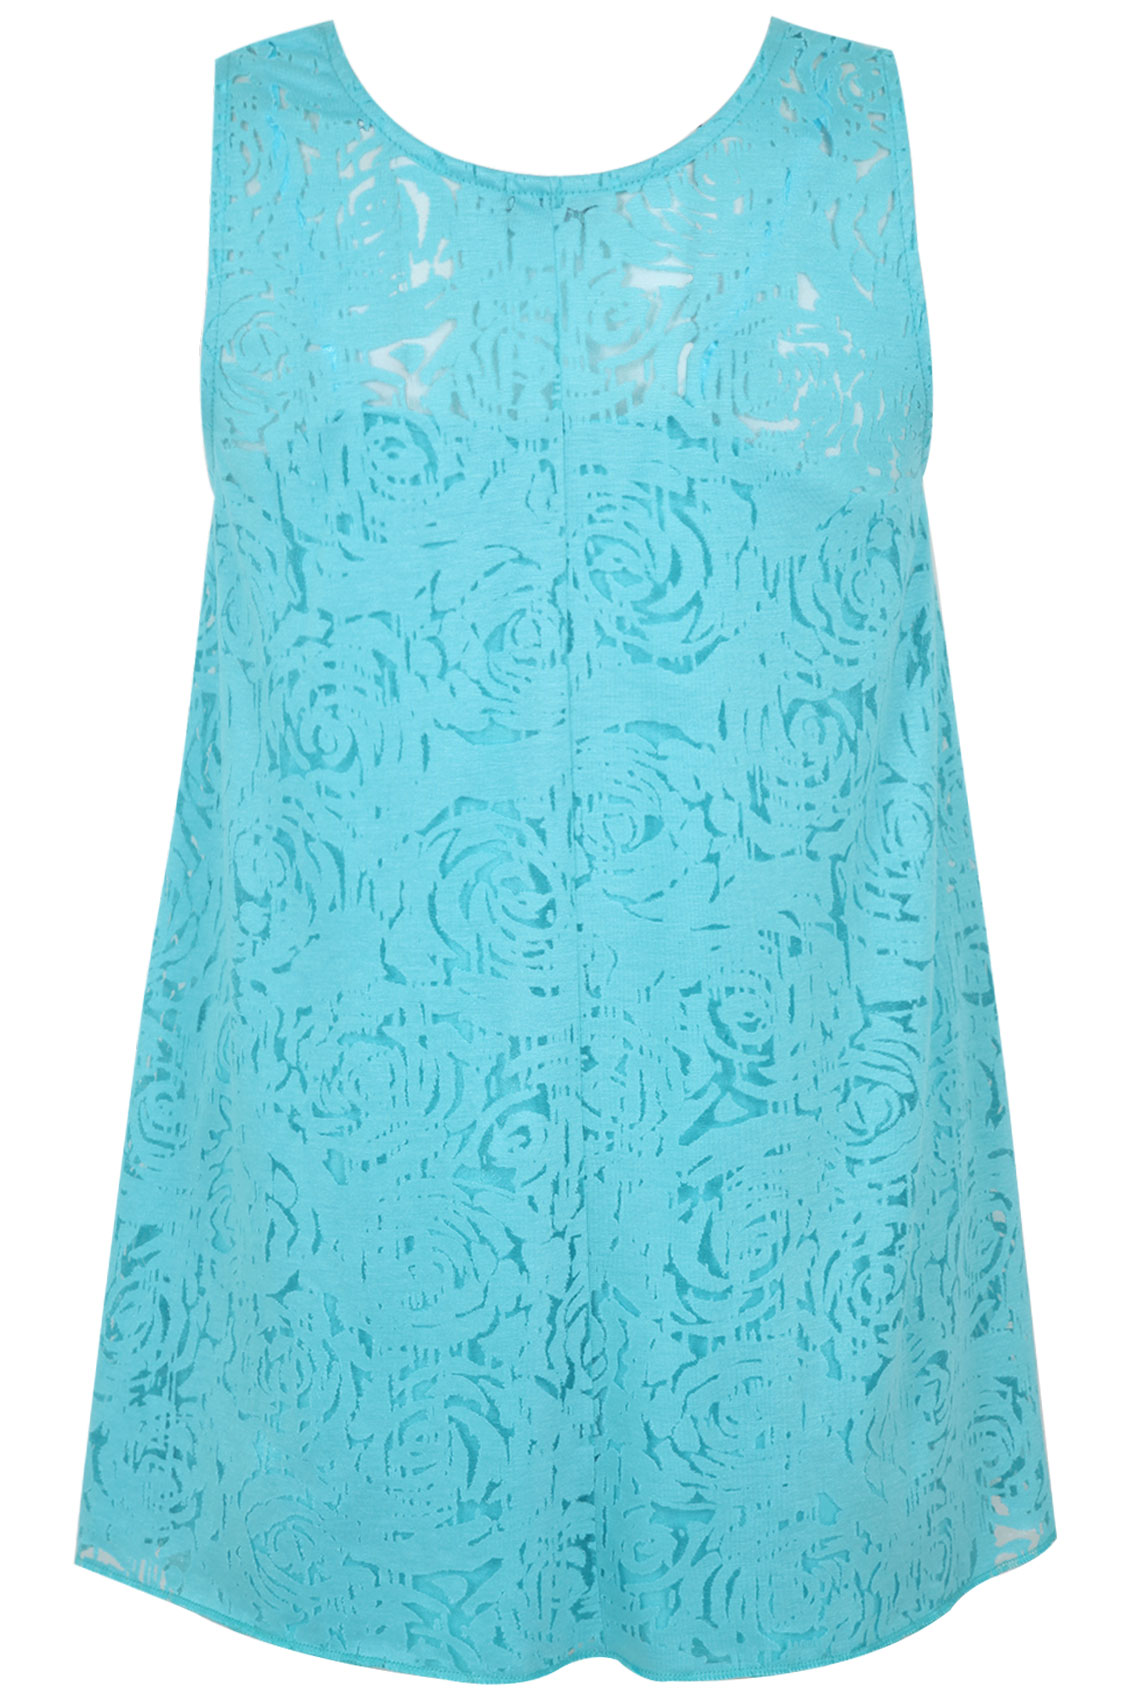 Turquoise Burn Out Sleeveless Jersey Top With Camisole Lining plus size ...